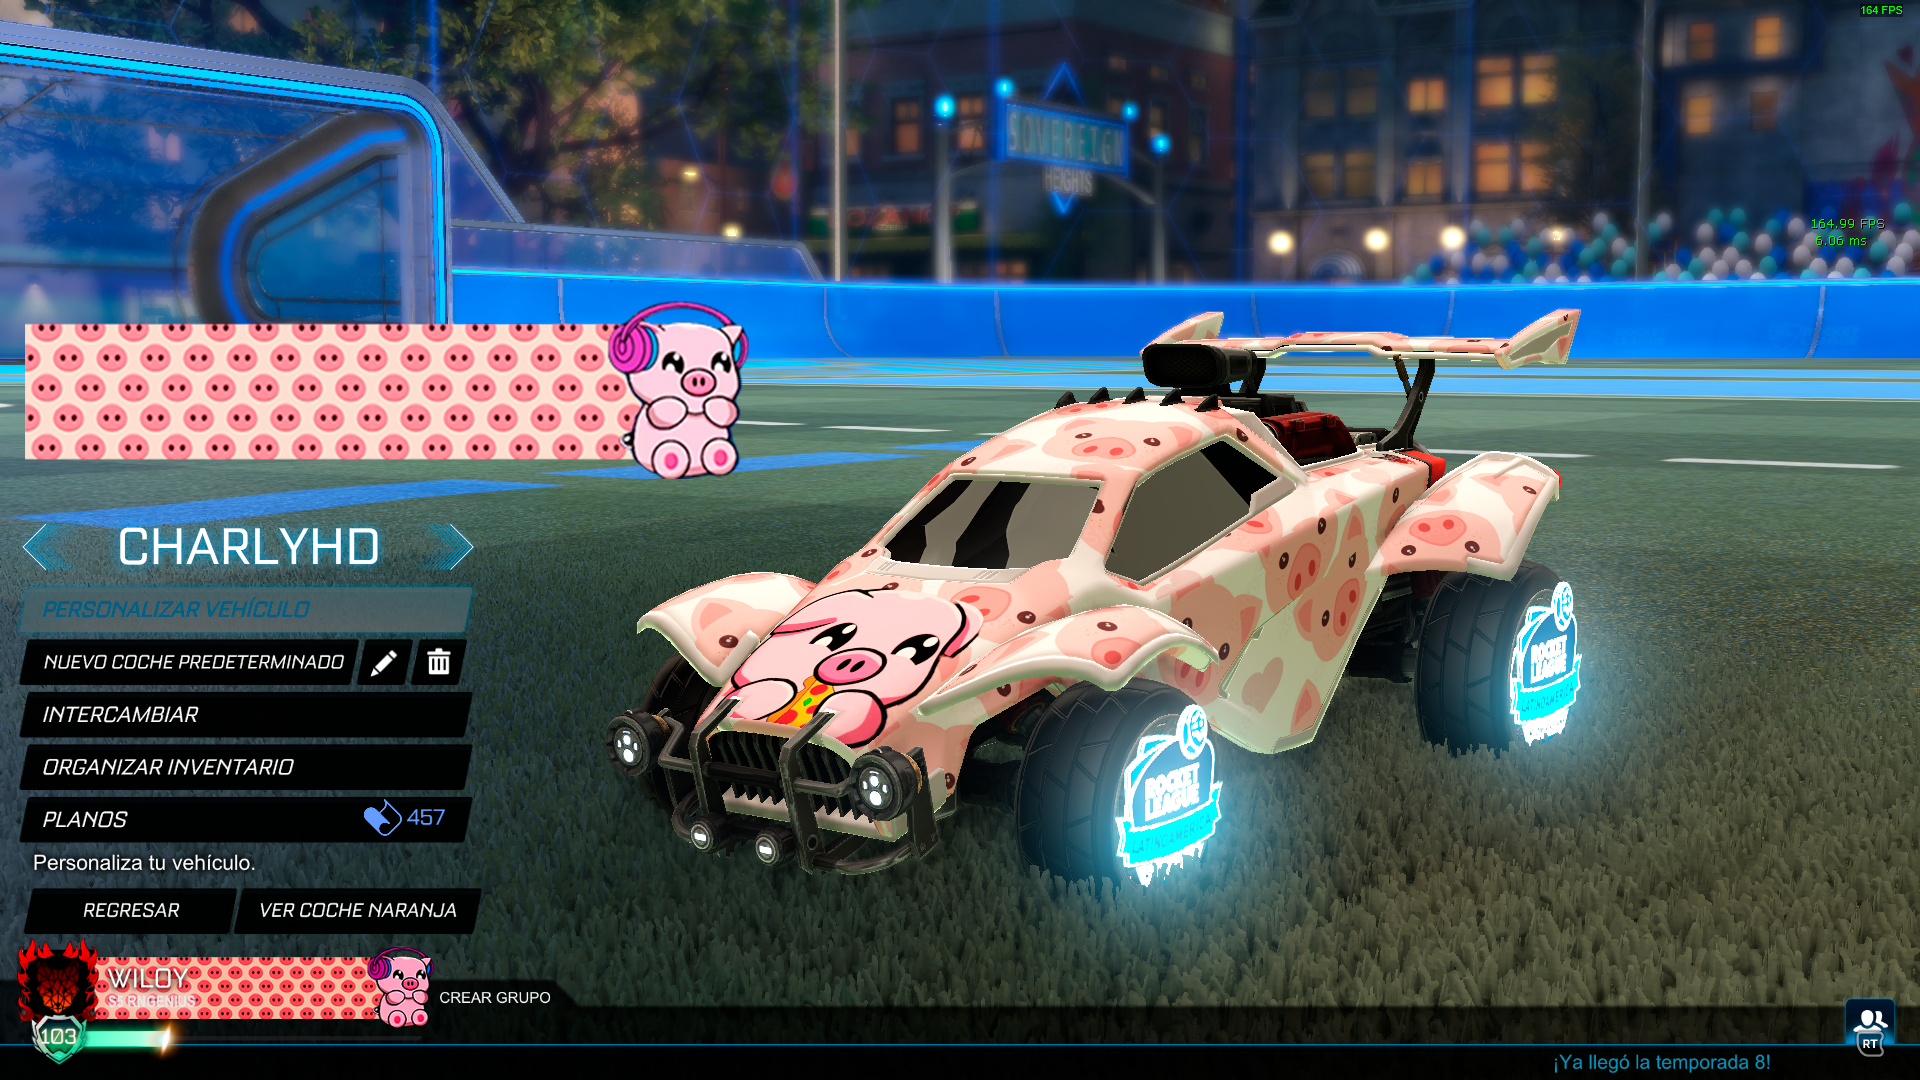 CharlyHD’s Decal and Banner